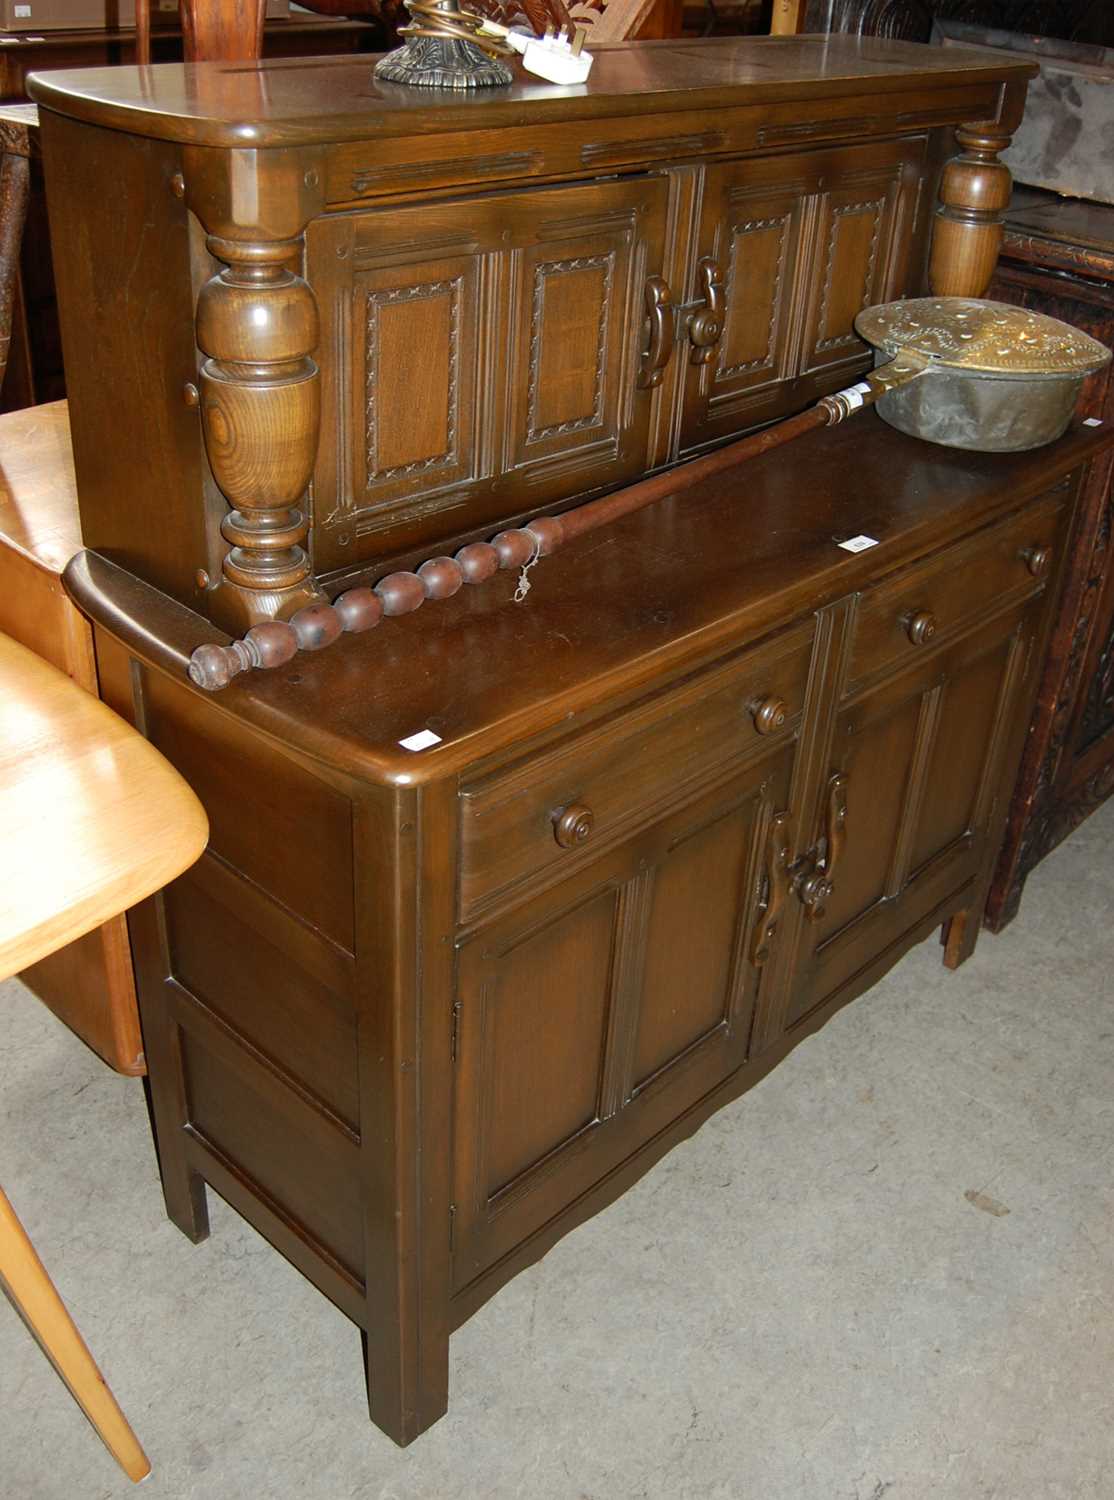 A stained wood Ercol type Jacobean style dresser